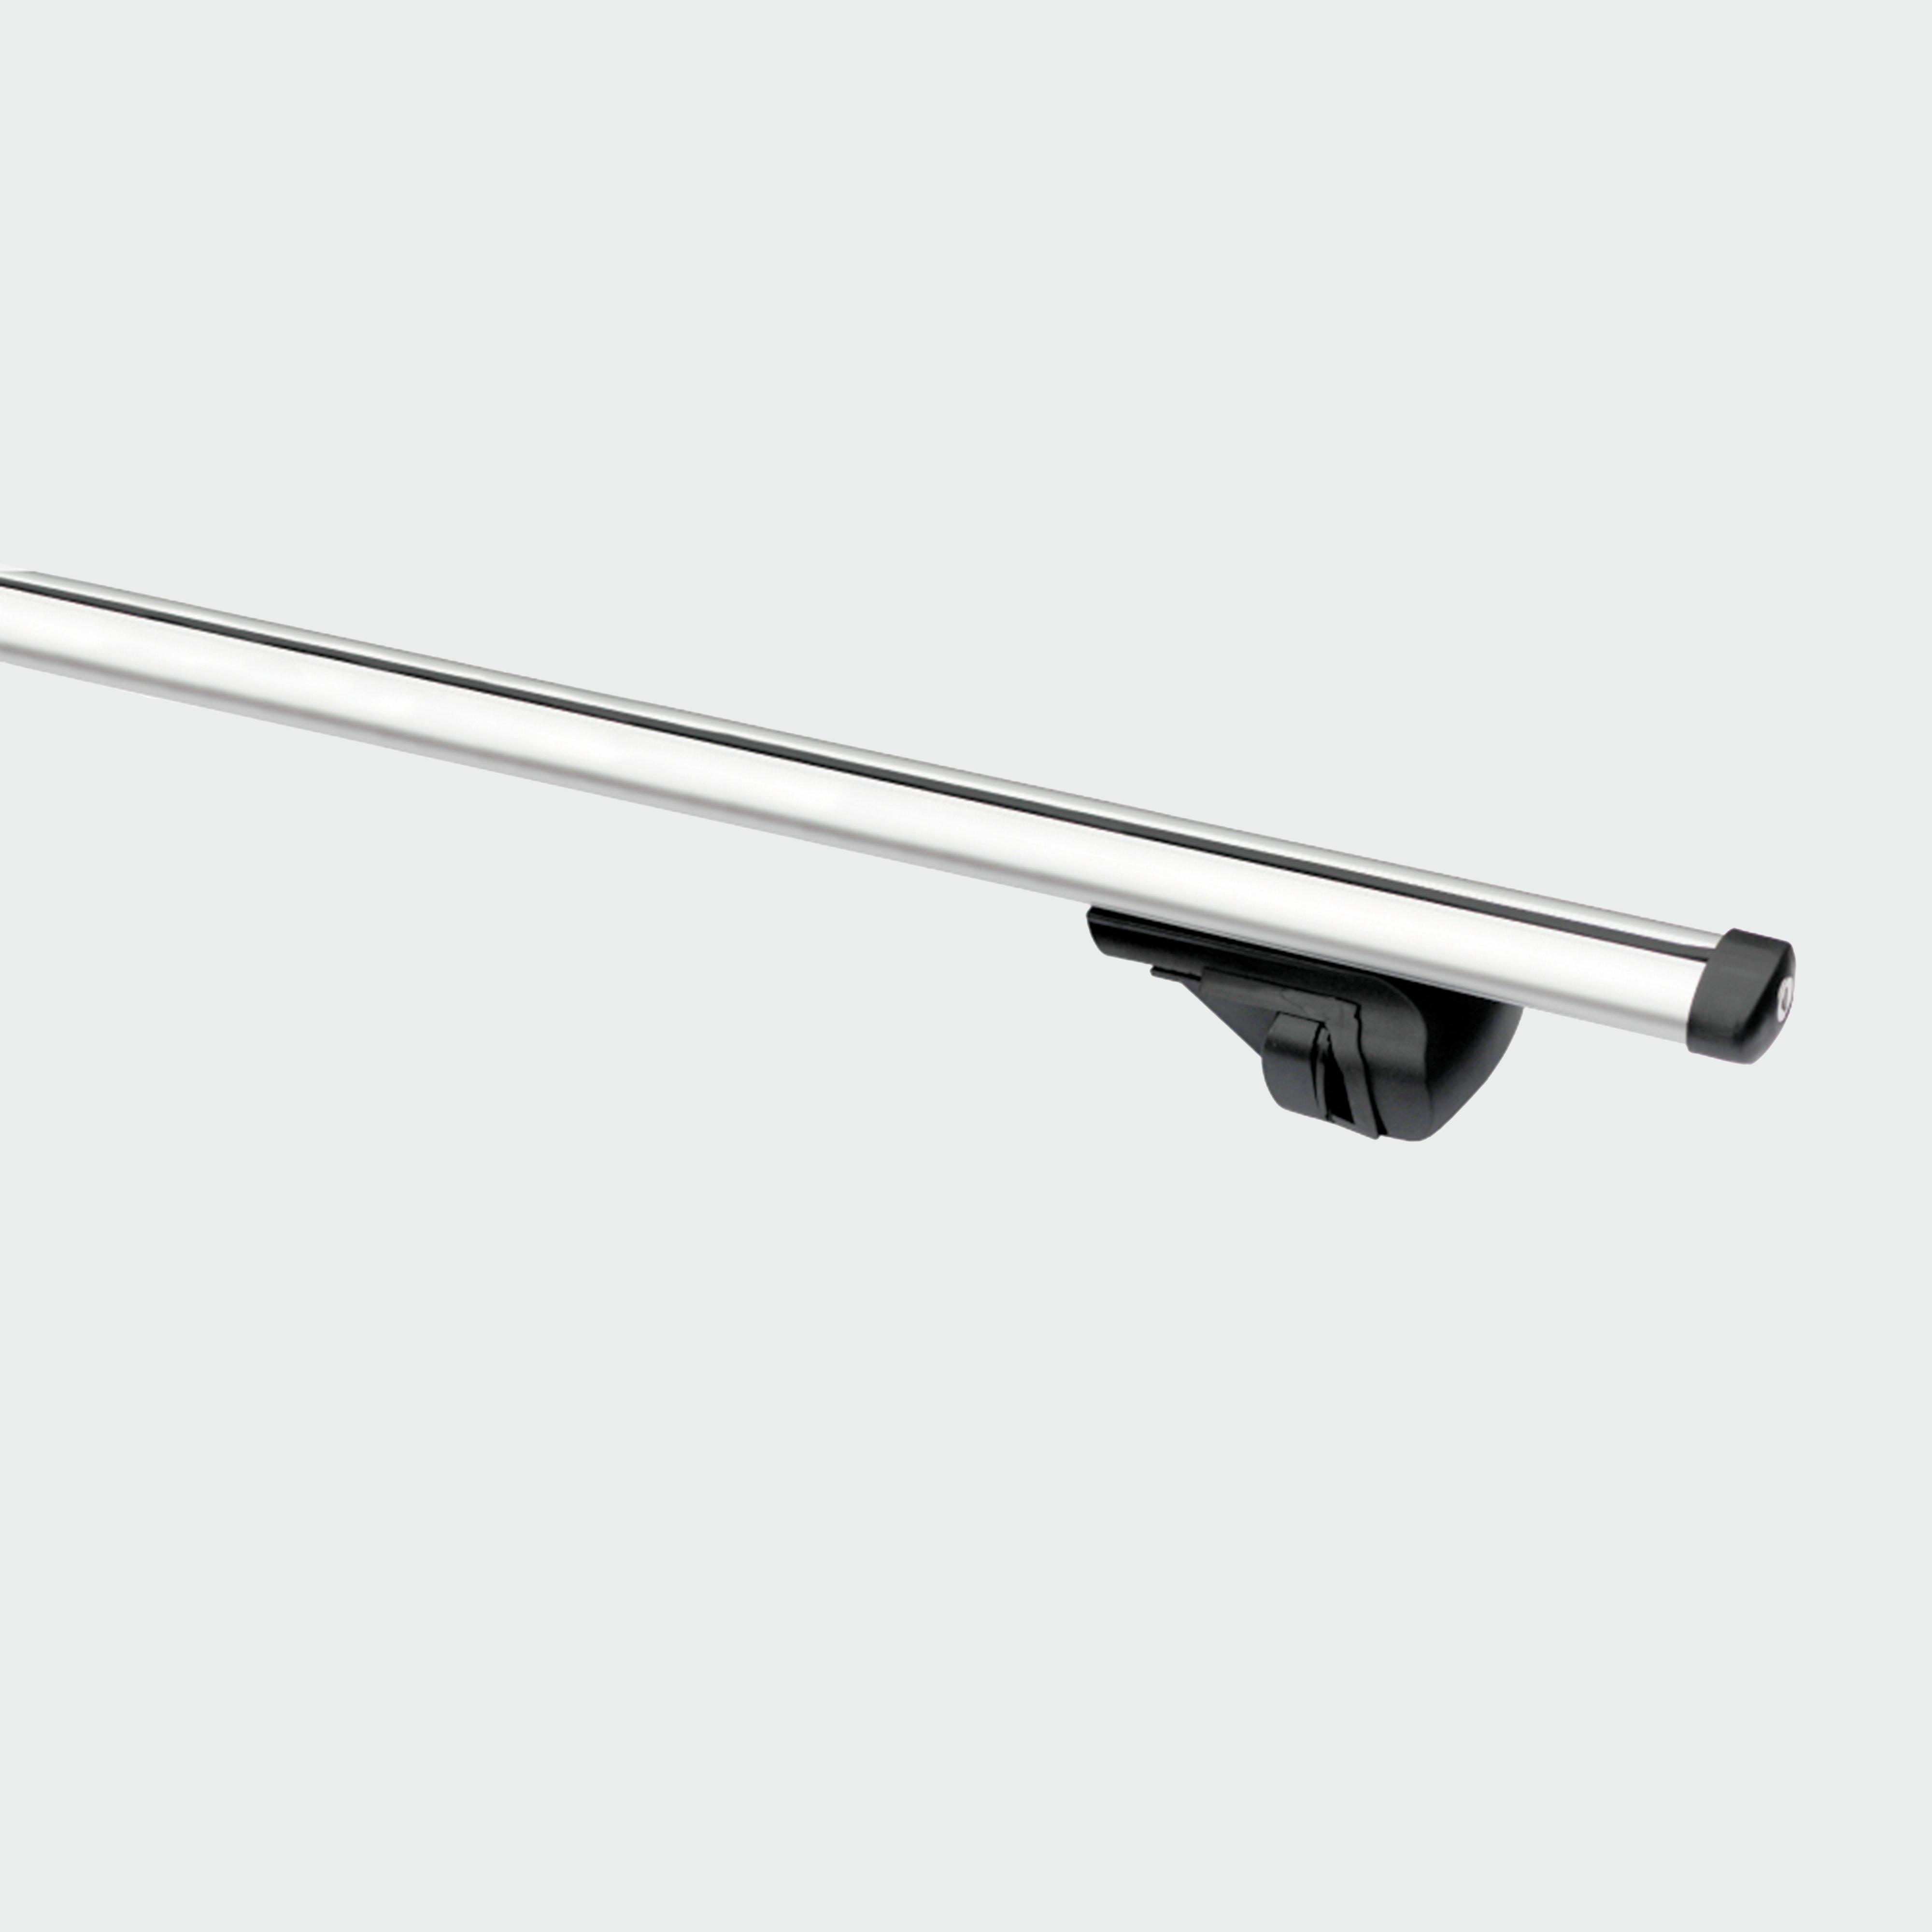 Summit ROOF BAR RAIL Review